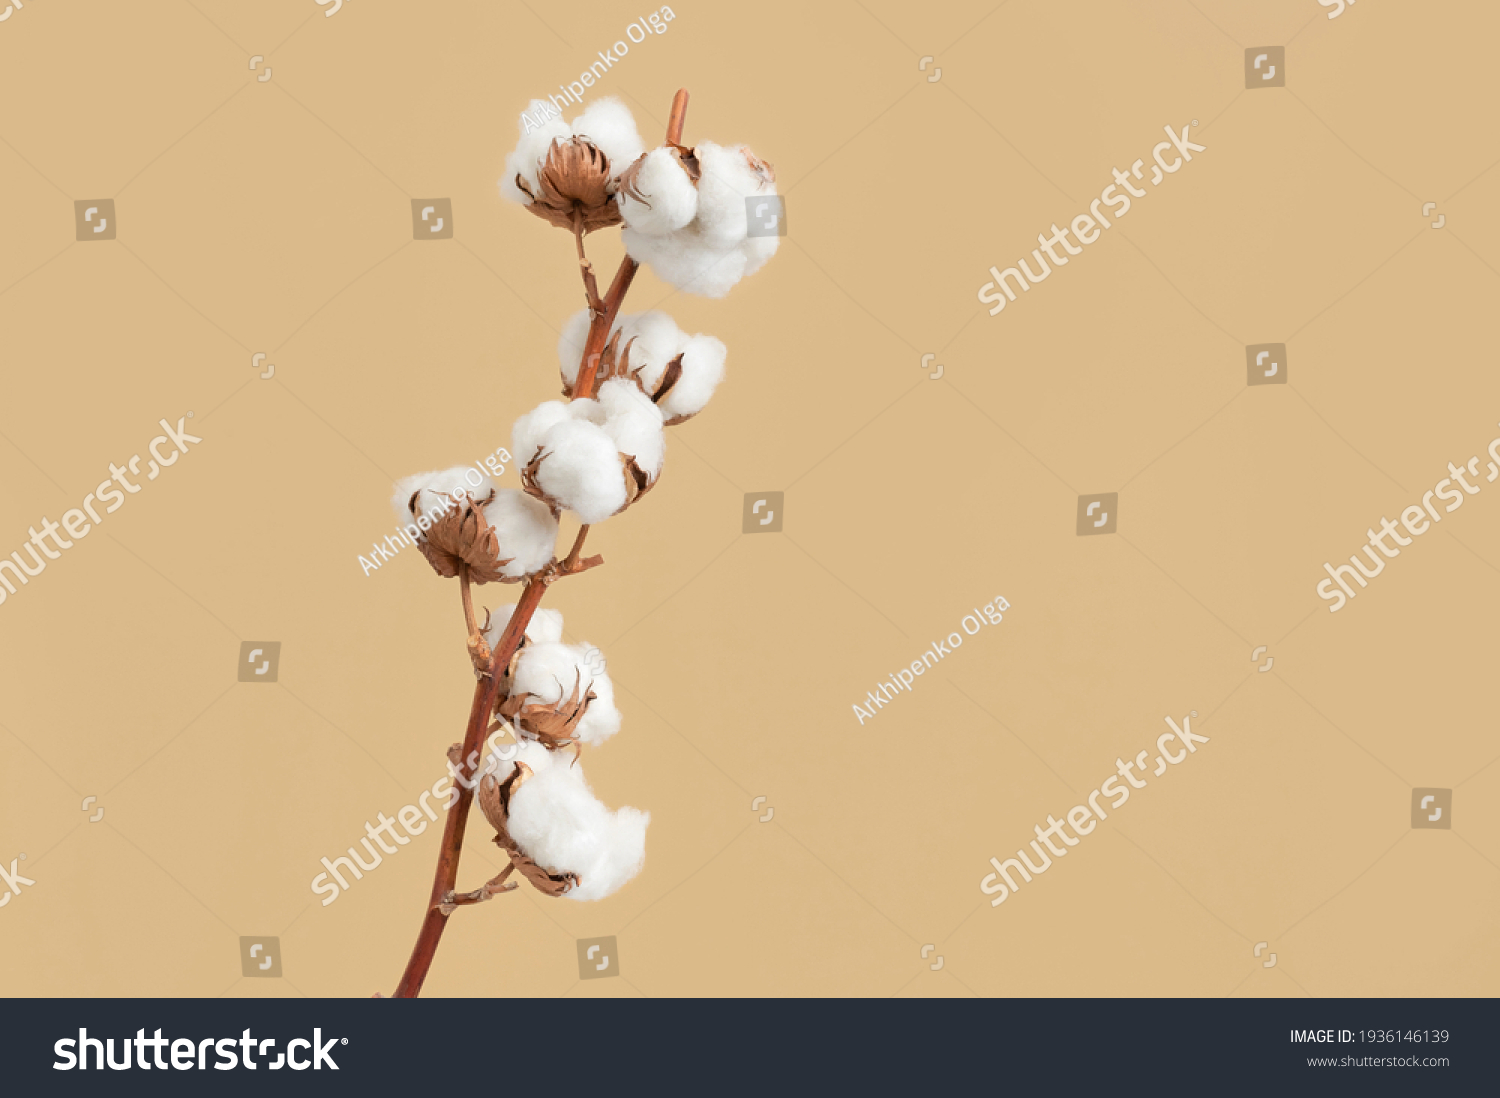 Branch with white fluffy cotton flowers on beige background flat lay. Delicate light beauty cotton background. Natural organic fiber, agriculture, cotton seeds, raw materials for making fabric #1936146139